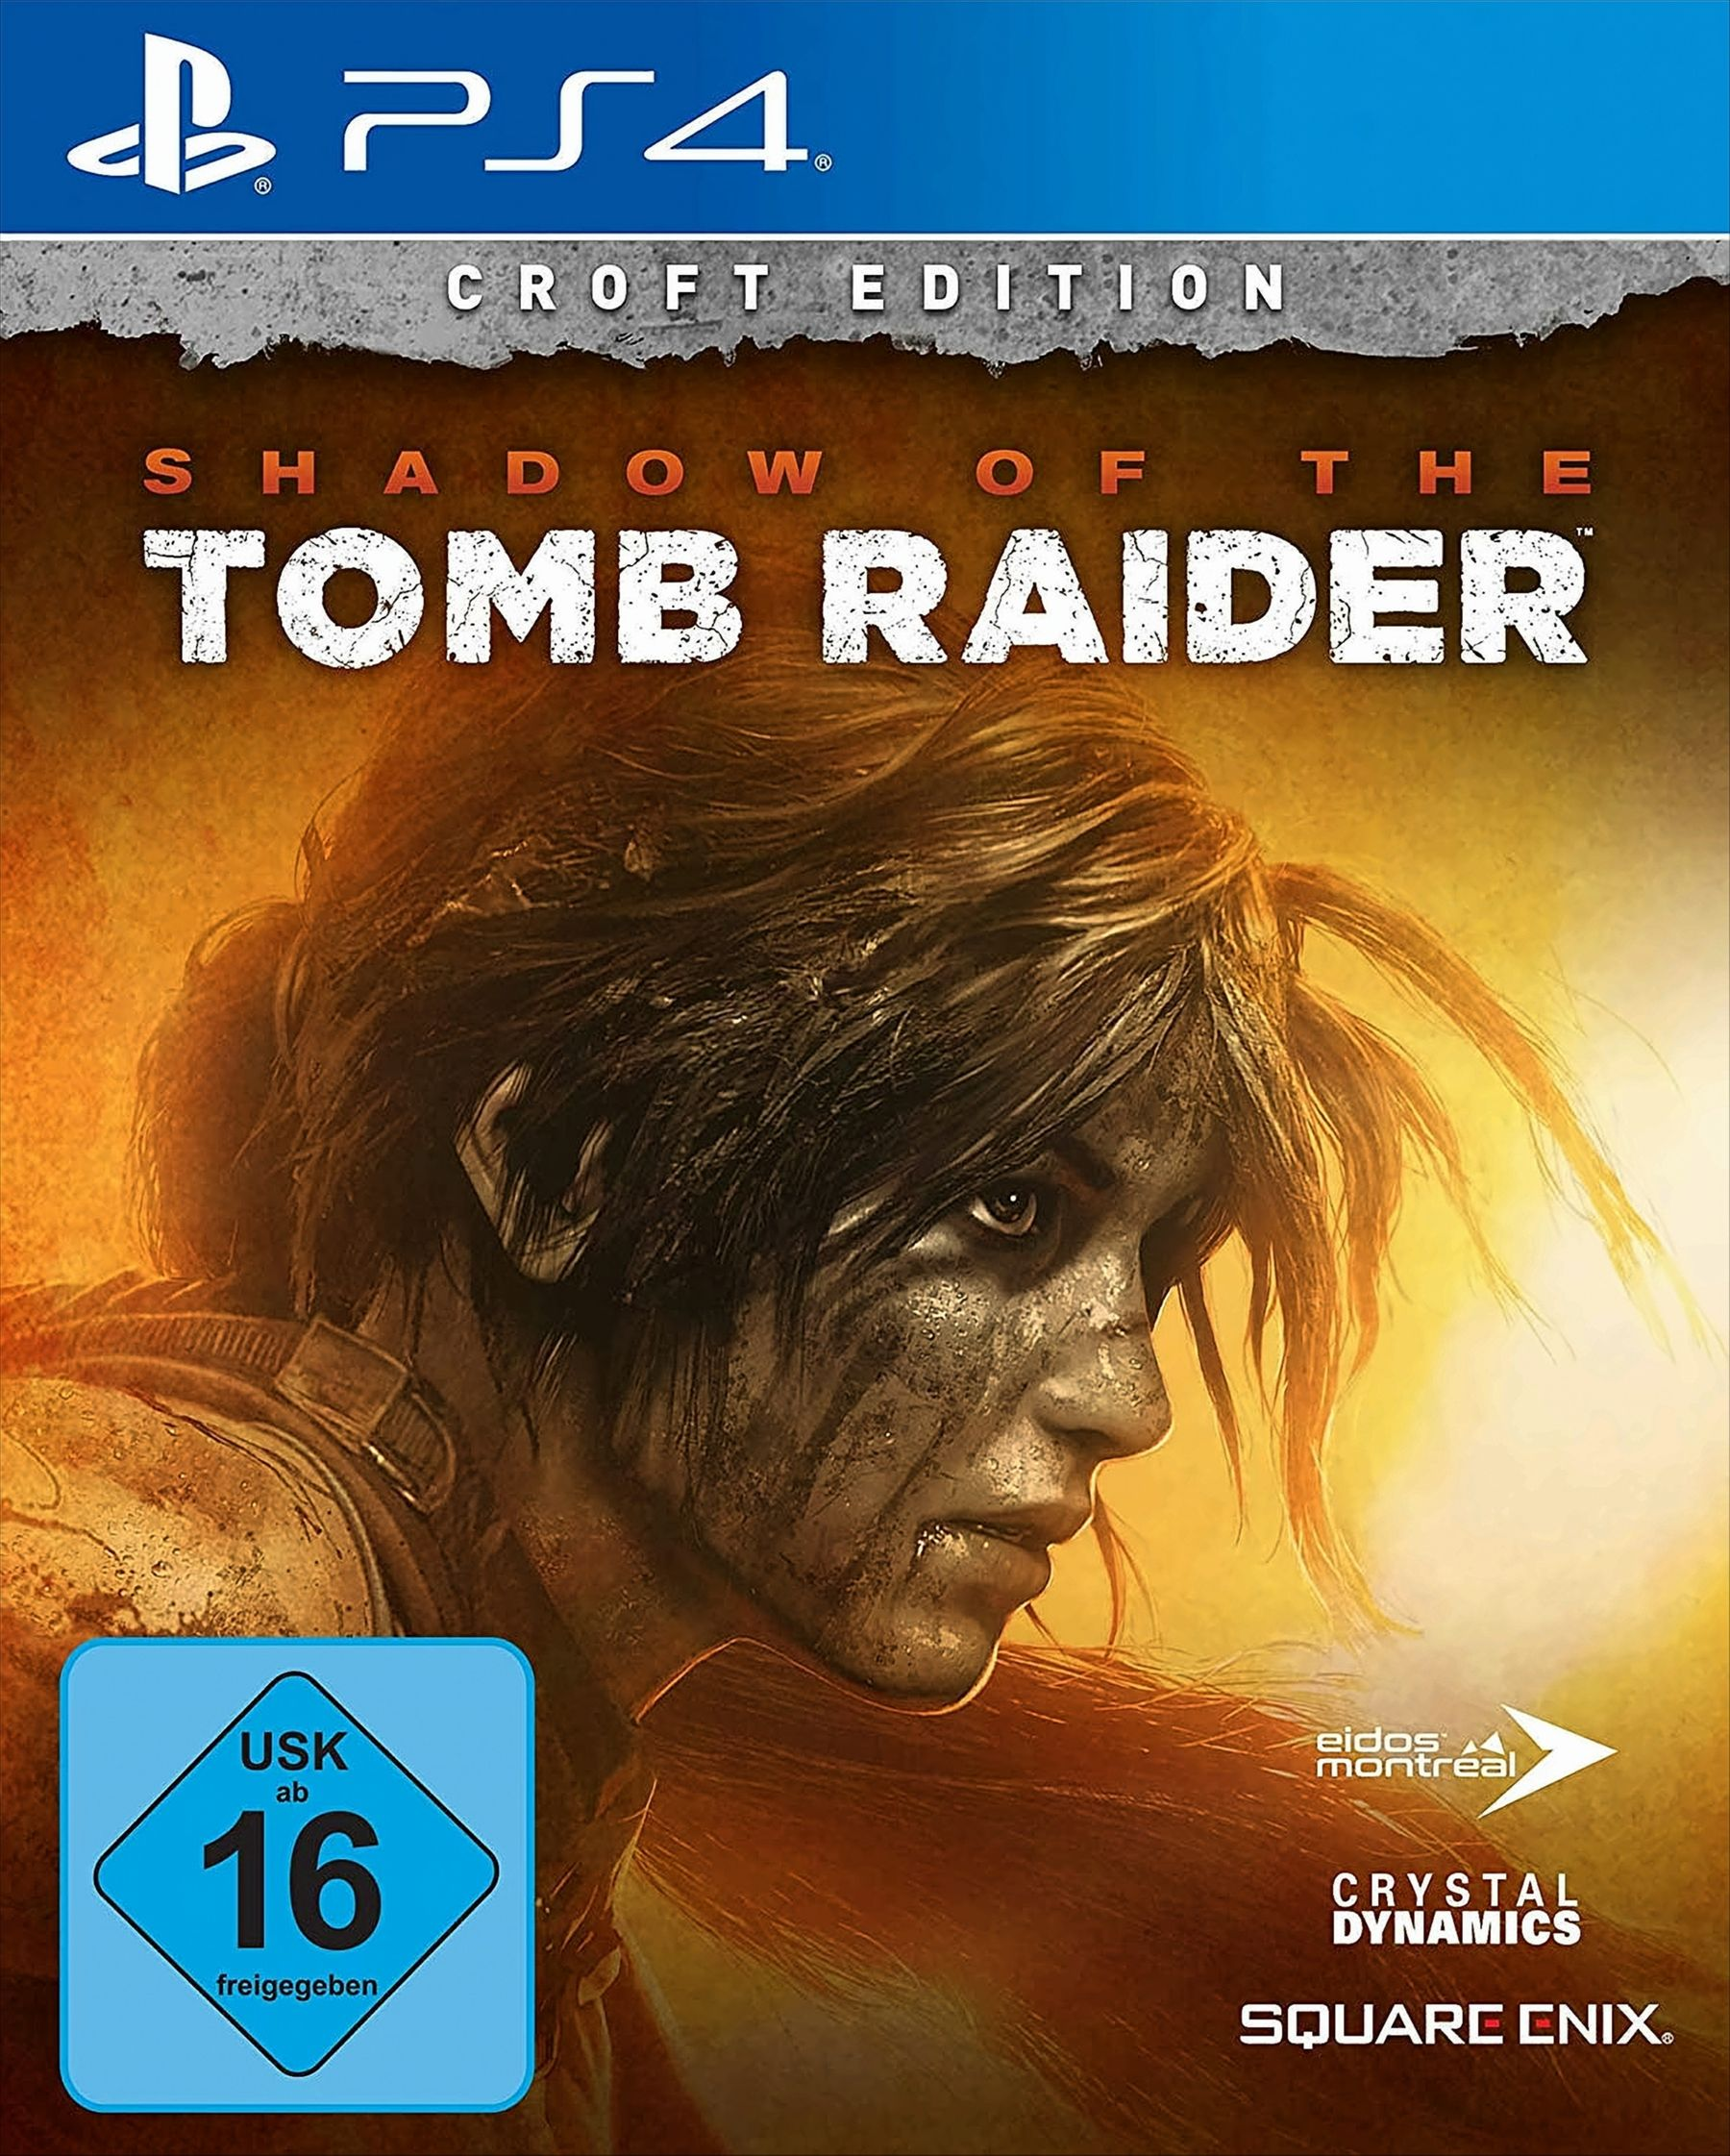 Shadow of the Tomb Raider 4] (PS4) - (USK) Croft Edition [PlayStation